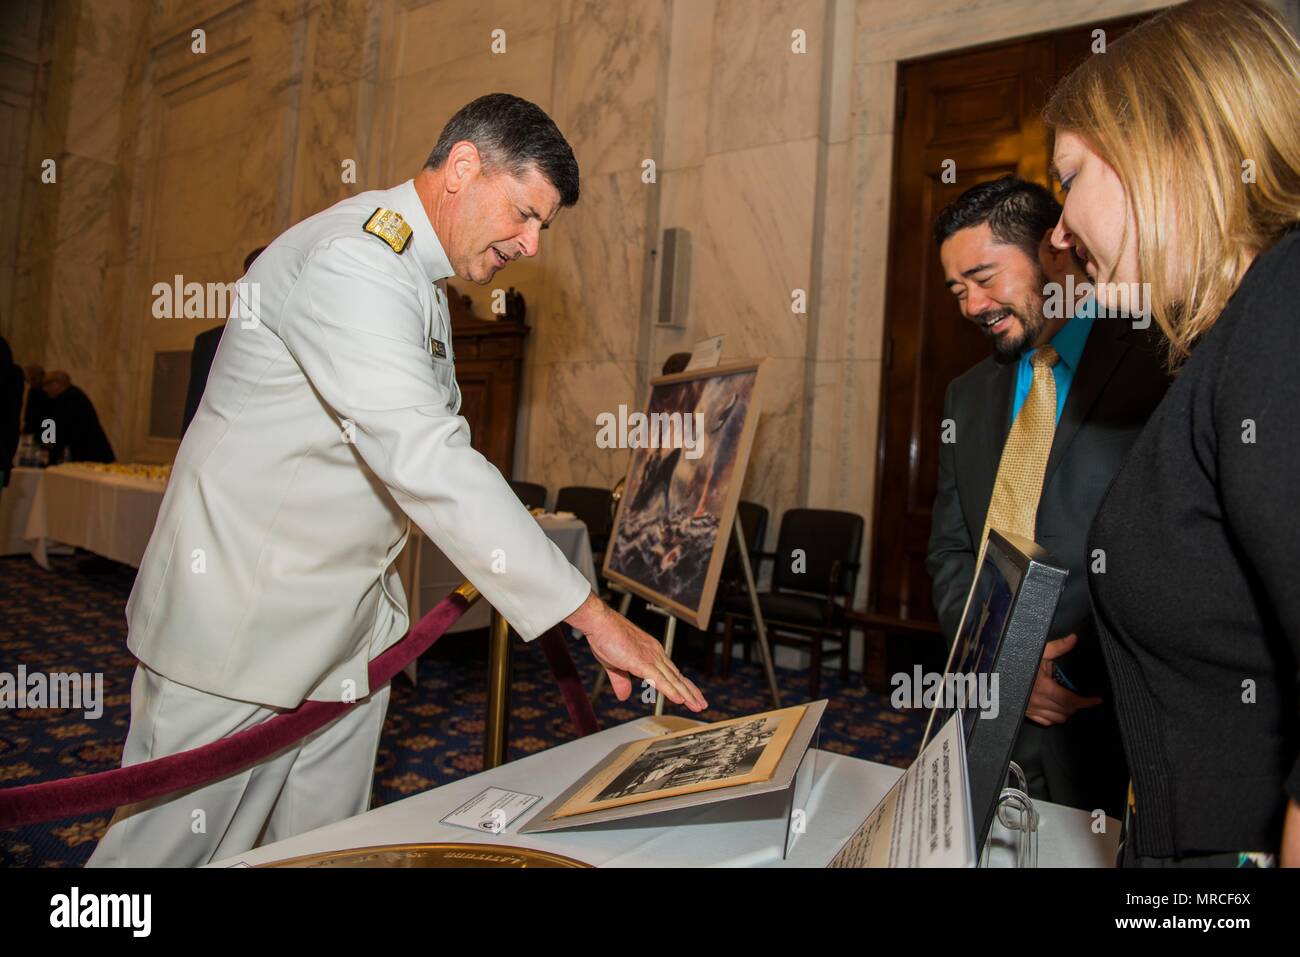 170606-N-XP477-0110   WASHINGTON (Jun. 06, 2017) Vice Chief of Naval Operations, Adm. Bill Moran examines World War II memorabilia on display by the Naval History and Heritage Command at the 2017 Navy Legislative Affairs' Battle of Midway Ceremony. The ceremony was held to commemorate the 75th anniversary of the Battle of Midway which was the turning point of the United States' victory over Japan in the Pacific theater, and allowed the U.S. and the Allied Forces to concentrate their efforts to defeat Germany in Europe and end WWII. (U.S. Navy photo by Mass Communication Specialist 2nd Class Da Stock Photo